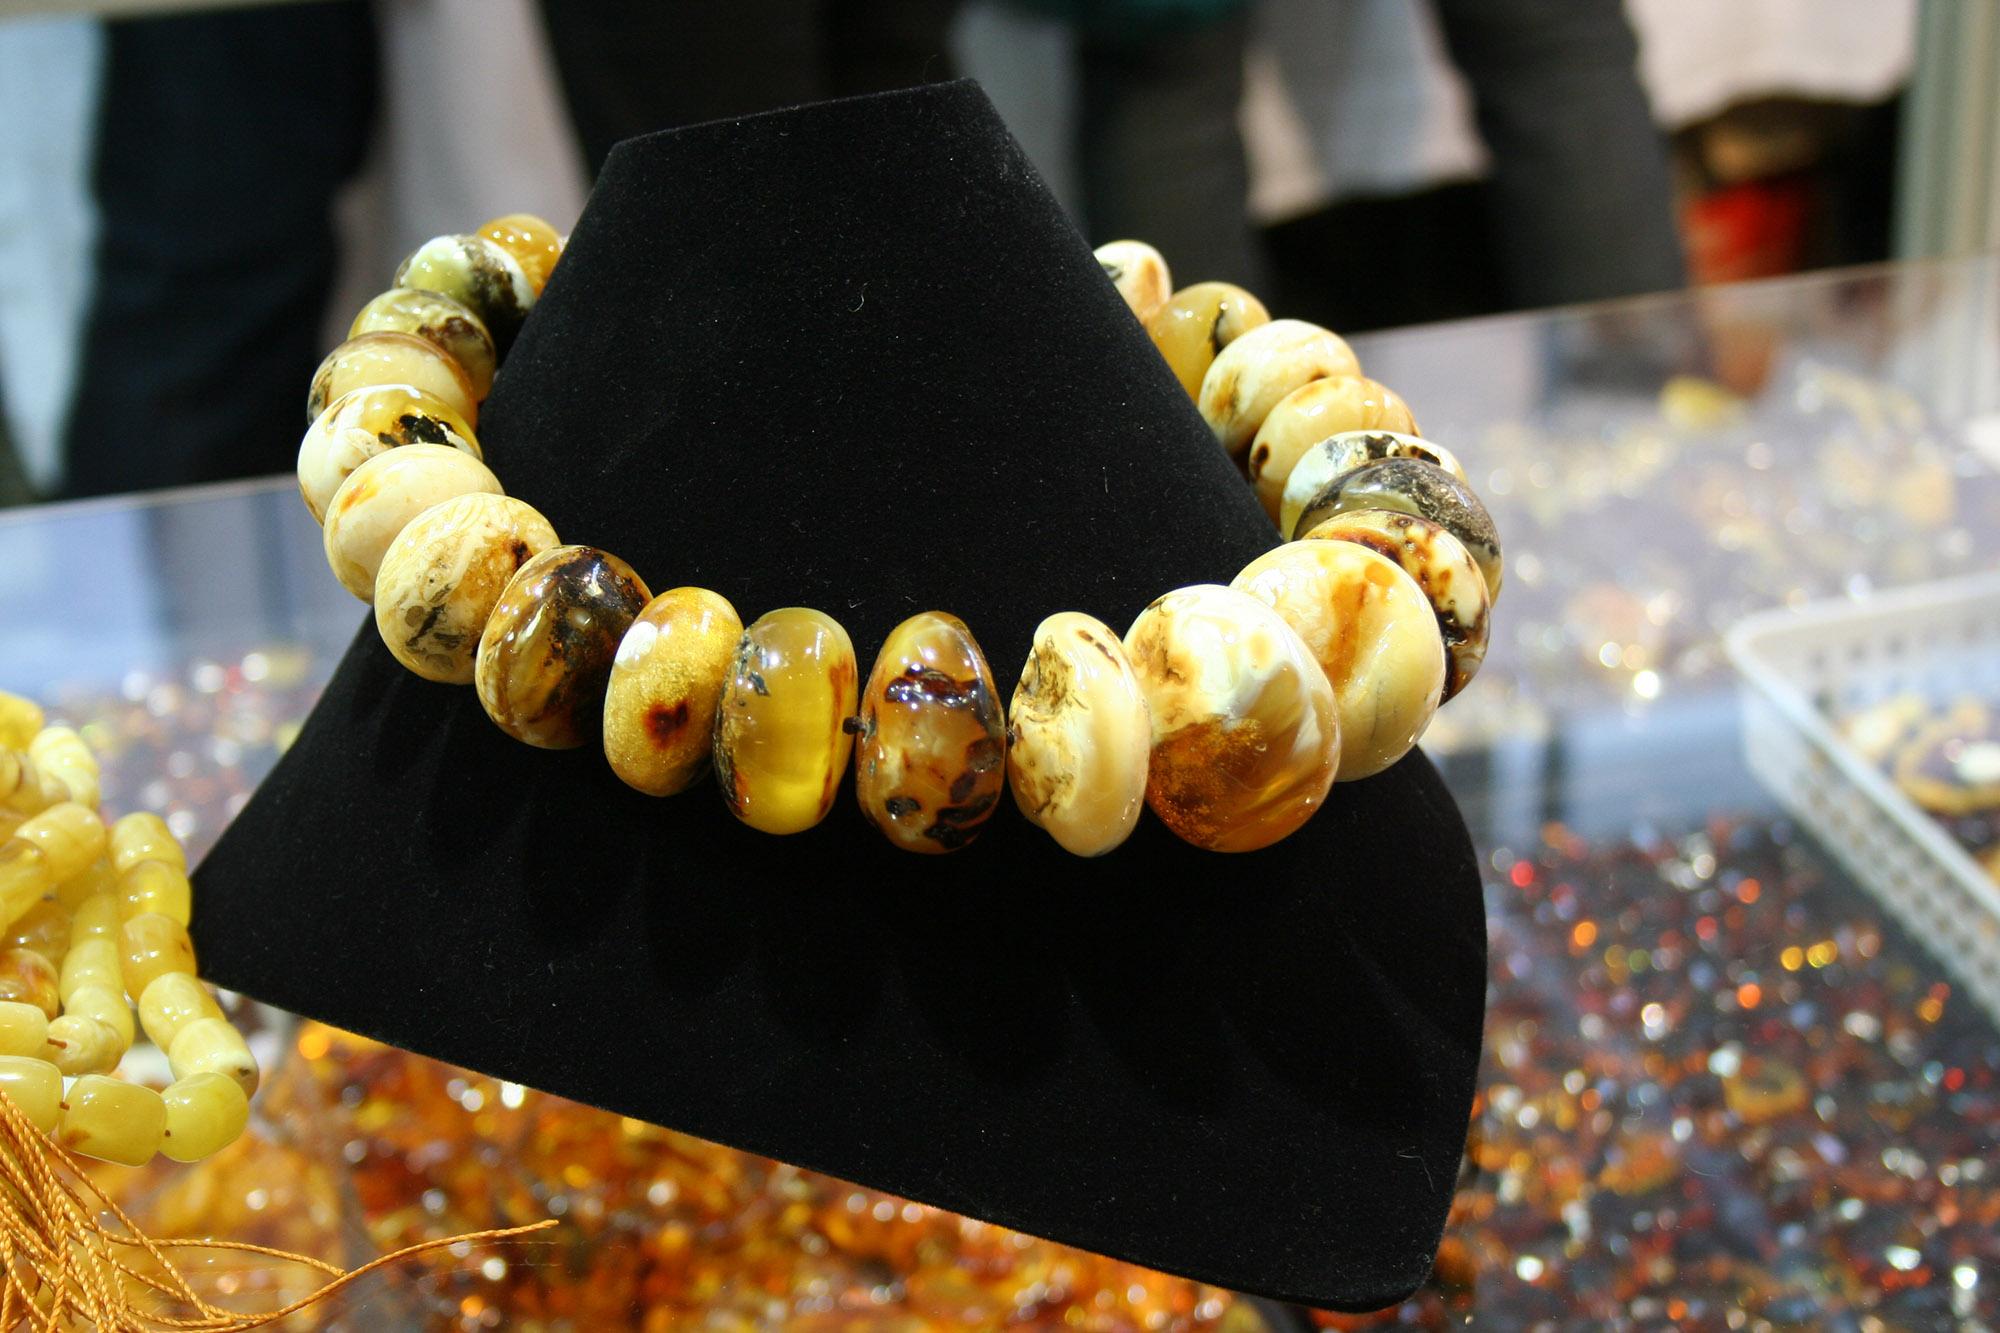 The amber neckless is loved by Lithuanian woman for its beauty and healing qualities. - © www.govilnius.lt